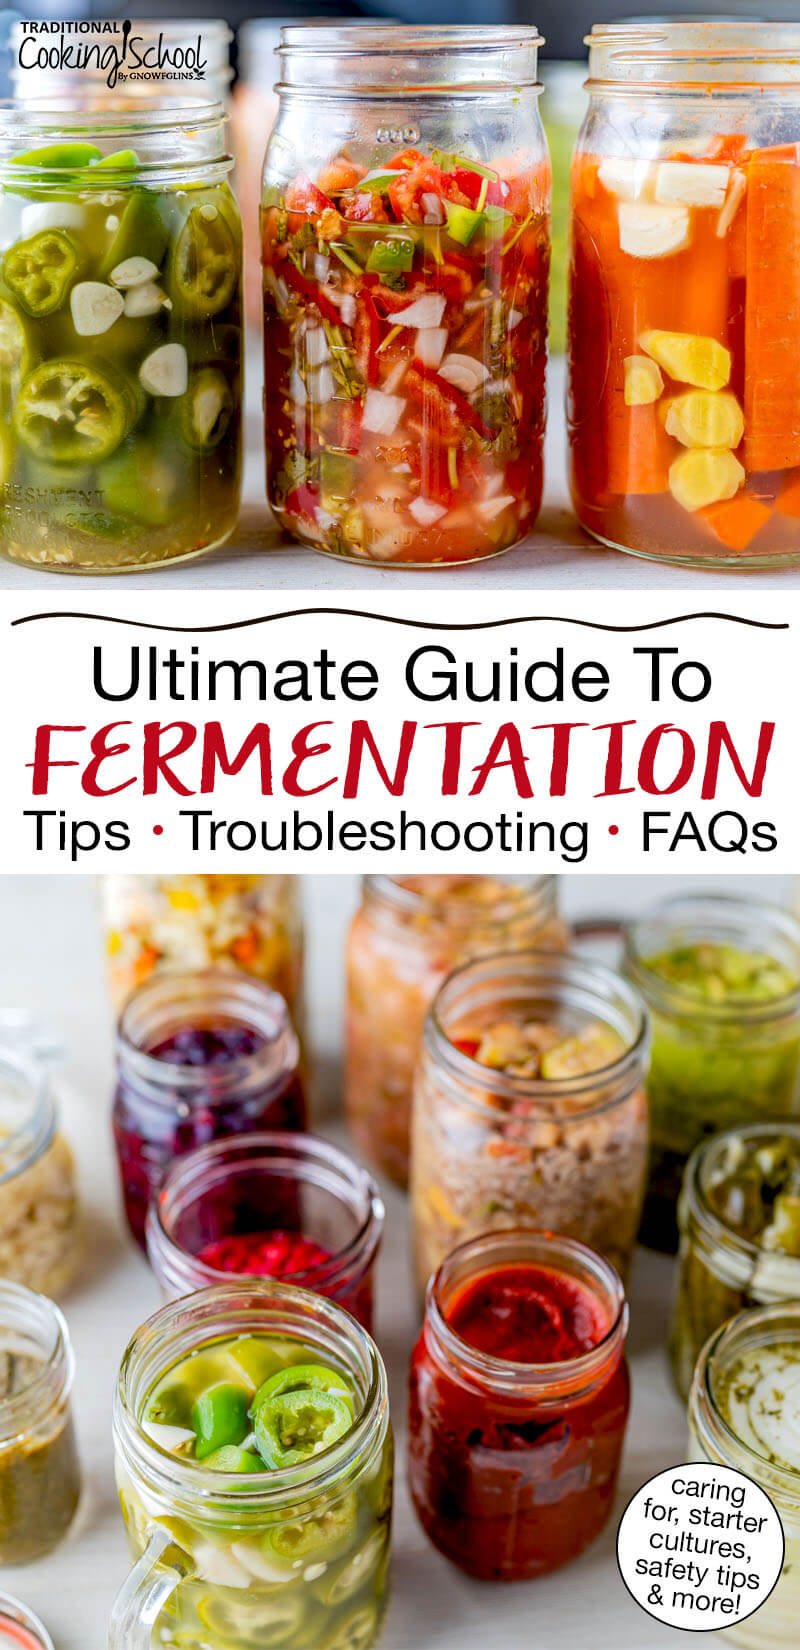 Photo collage of jars of a wide variety of homemade ferments. Text overlay says: "Ultimate Guide to Fermentation: Tips, Troubleshooting, FAQs (caring for, starter cultures, safety tips & more!)"